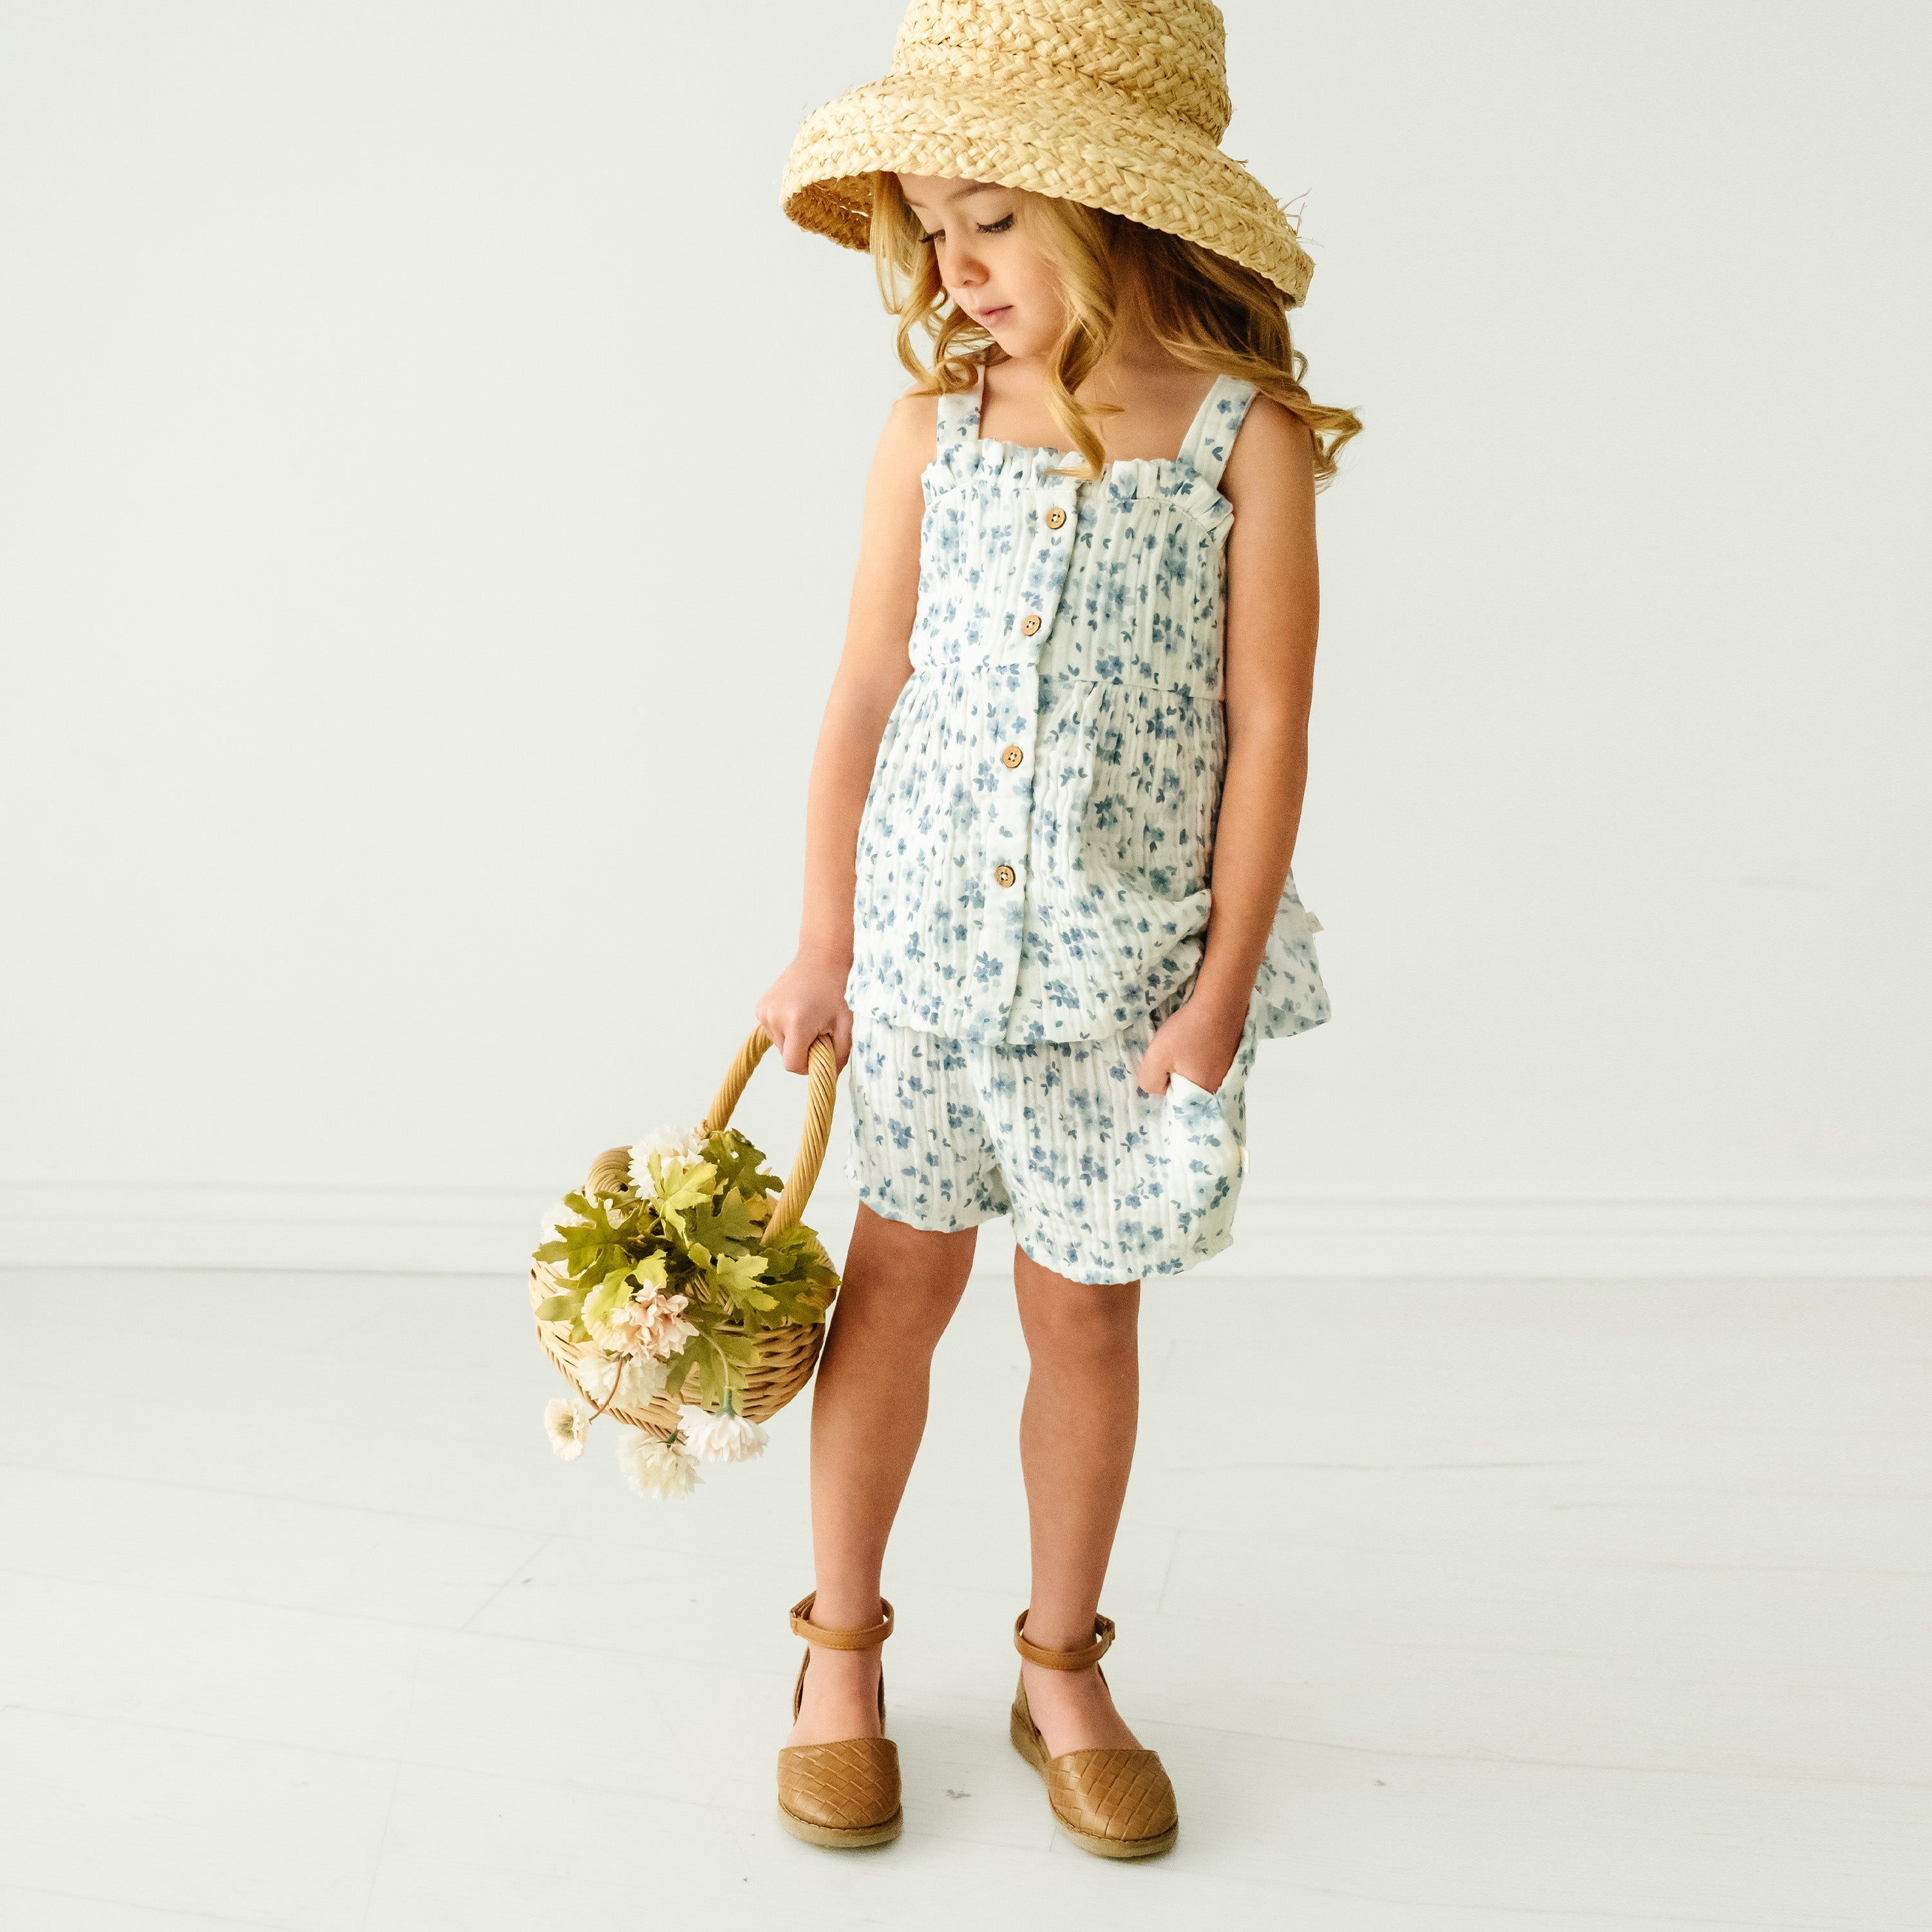 A young girl in a Makemake Organics Organic Muslin Peplum Top and Shorts Set - Periwinkle and straw hat holds a basket of flowers, standing in a minimalist white studio space.